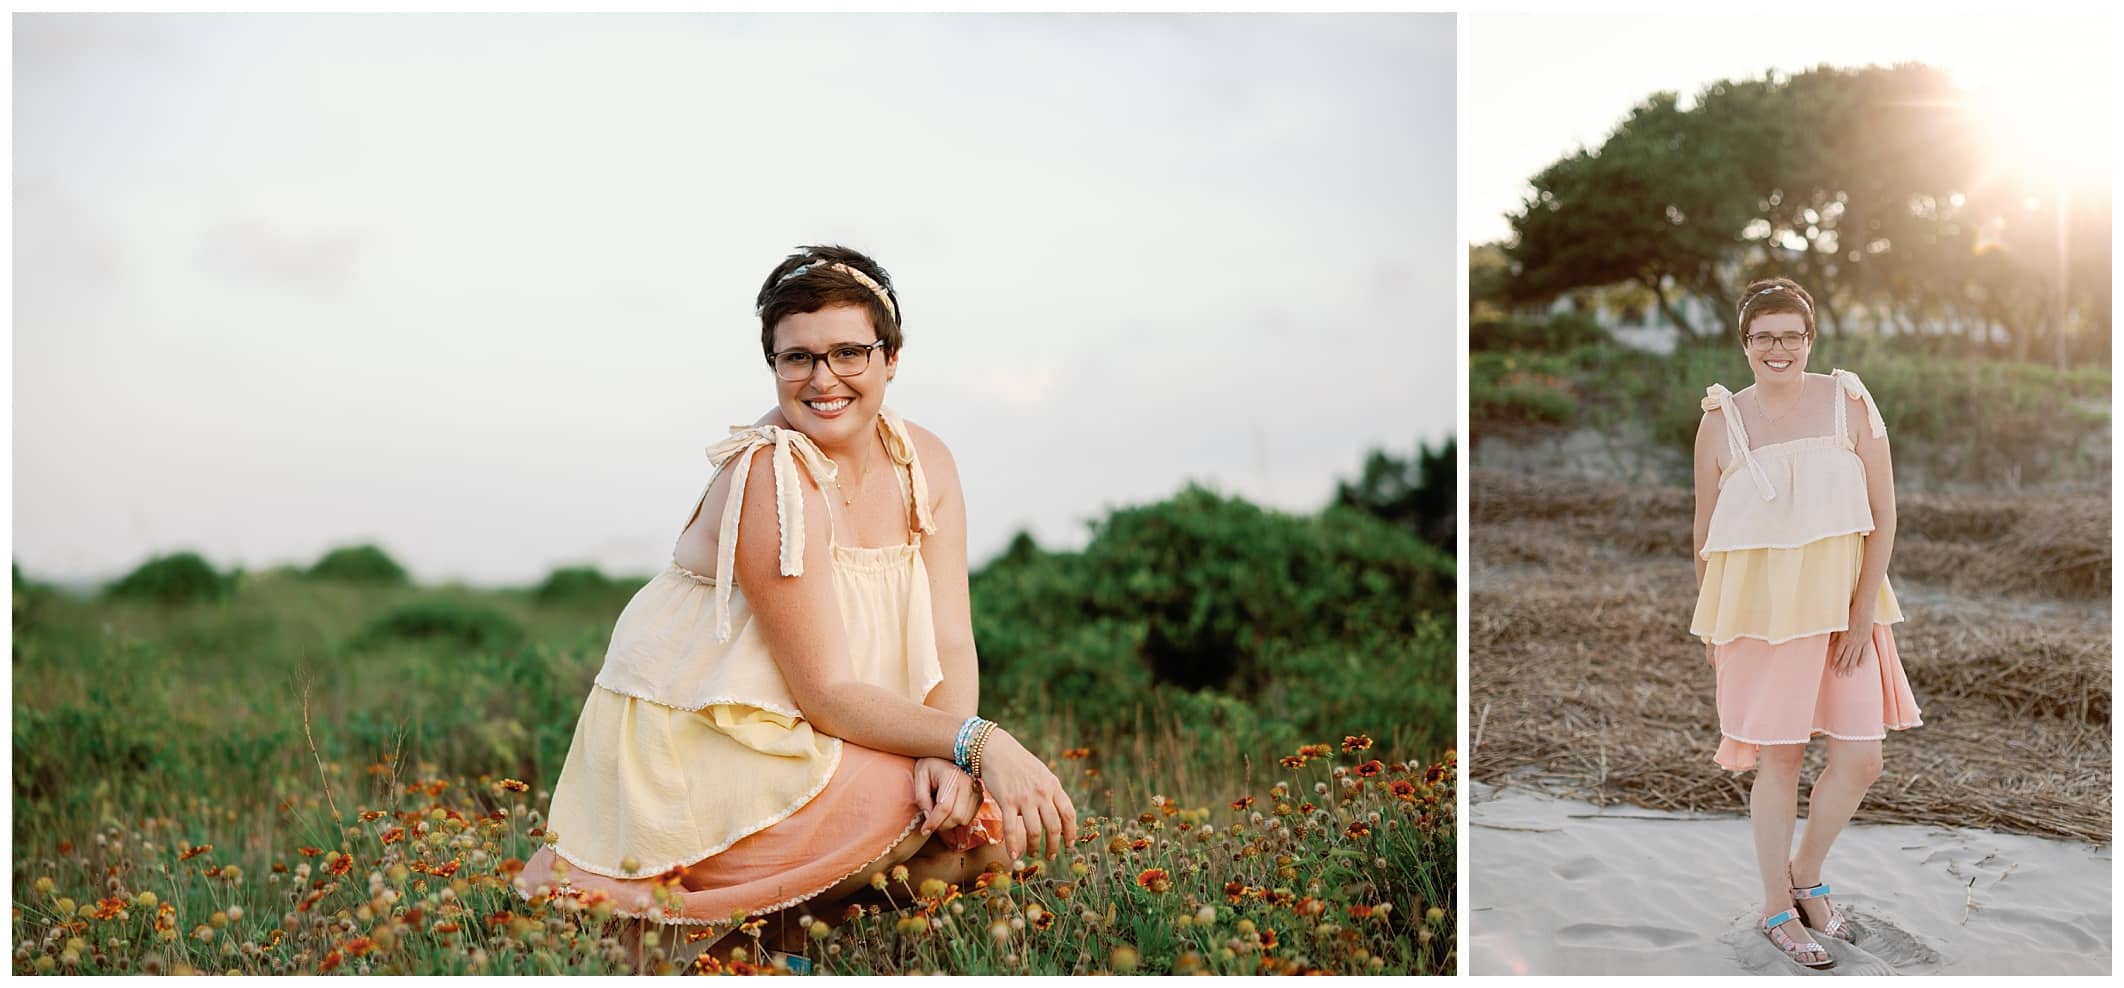 Two pictures of a woman posing in a field and on the beach at golden hour with golden sunlight shining behind them. 